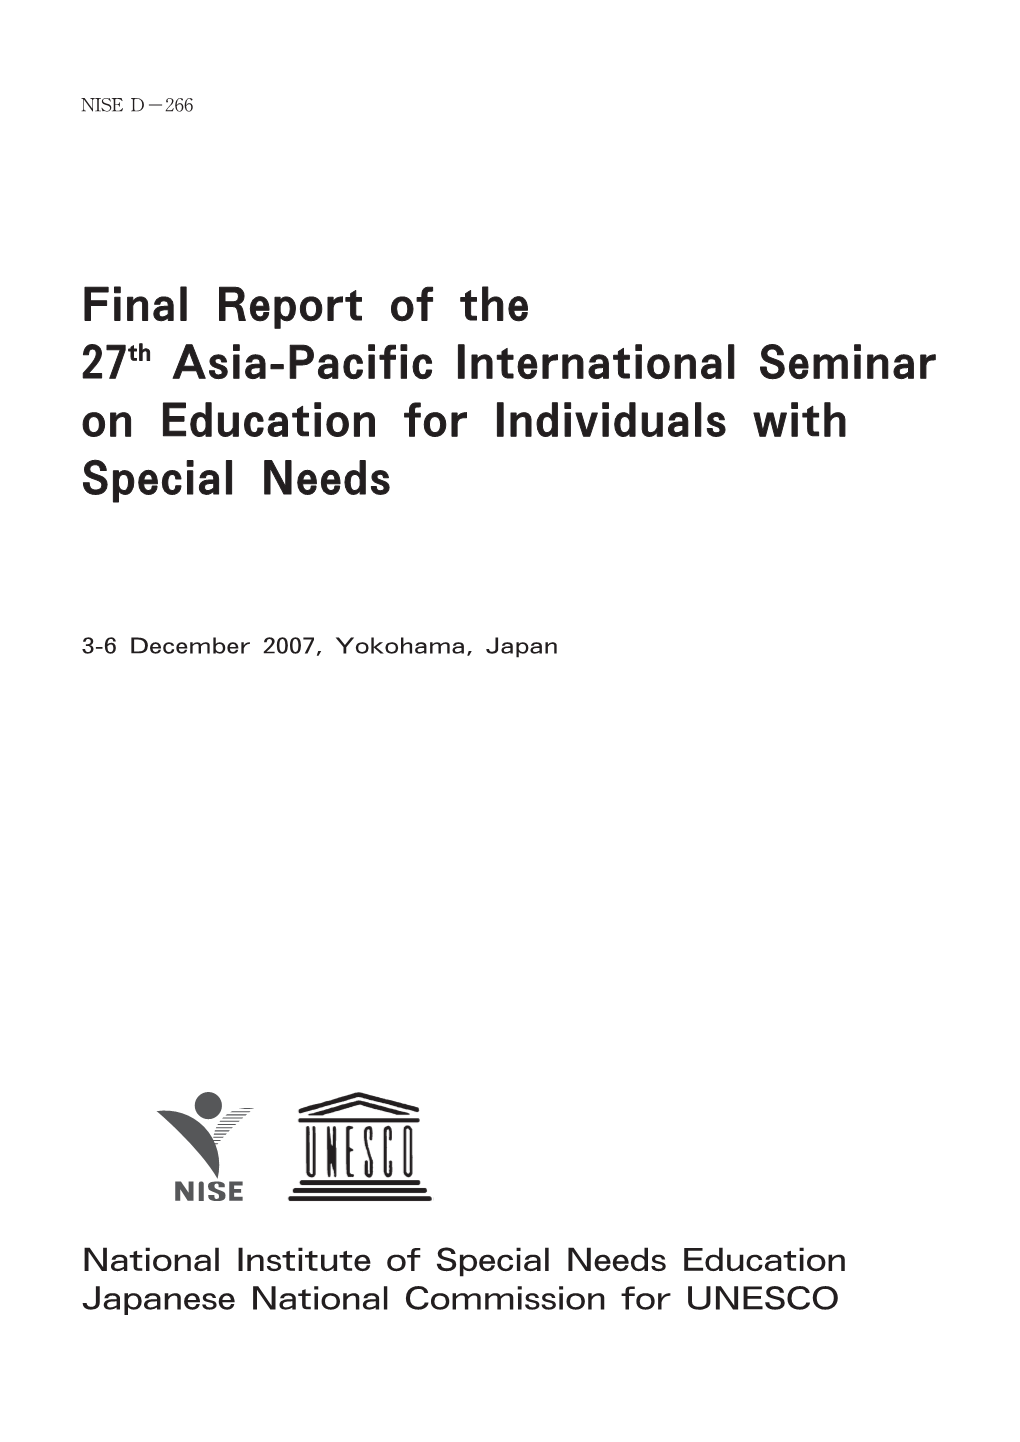 Final Report of the 27Th Asia-Pacific International Seminar on Education for Individuals with Special Needs